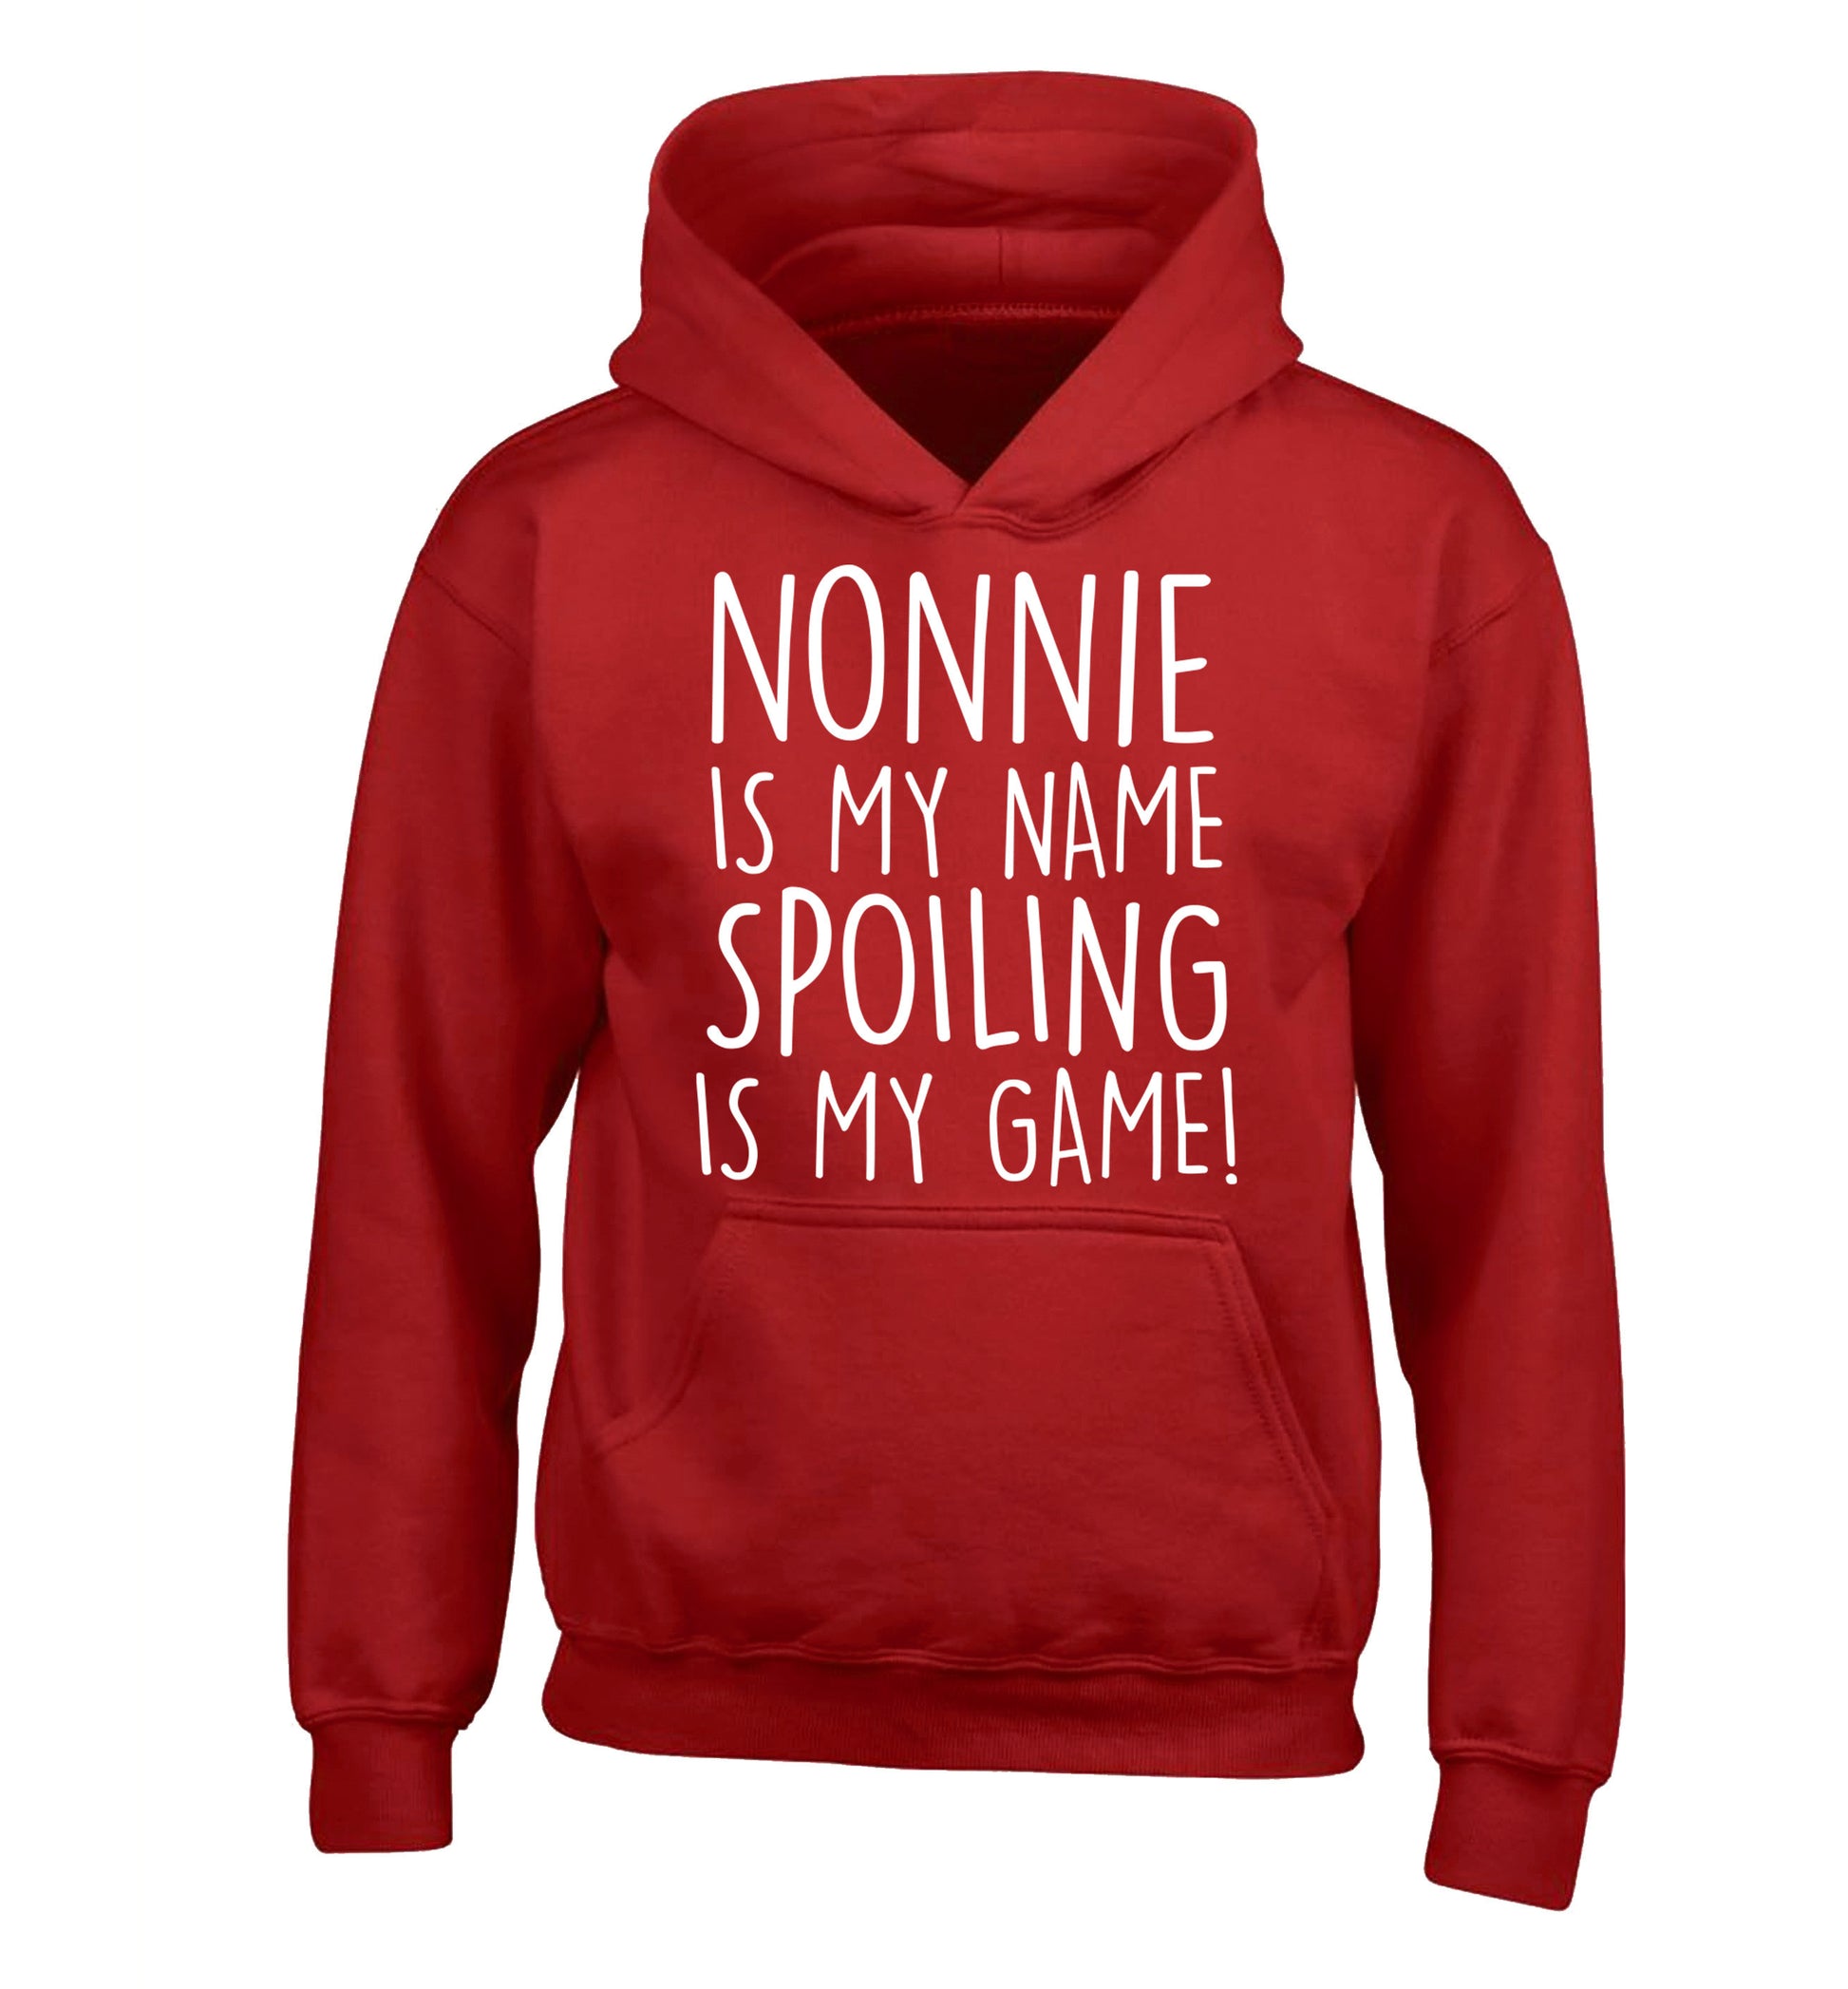 Nonnie is my name, spoiling is my game children's red hoodie 12-14 Years